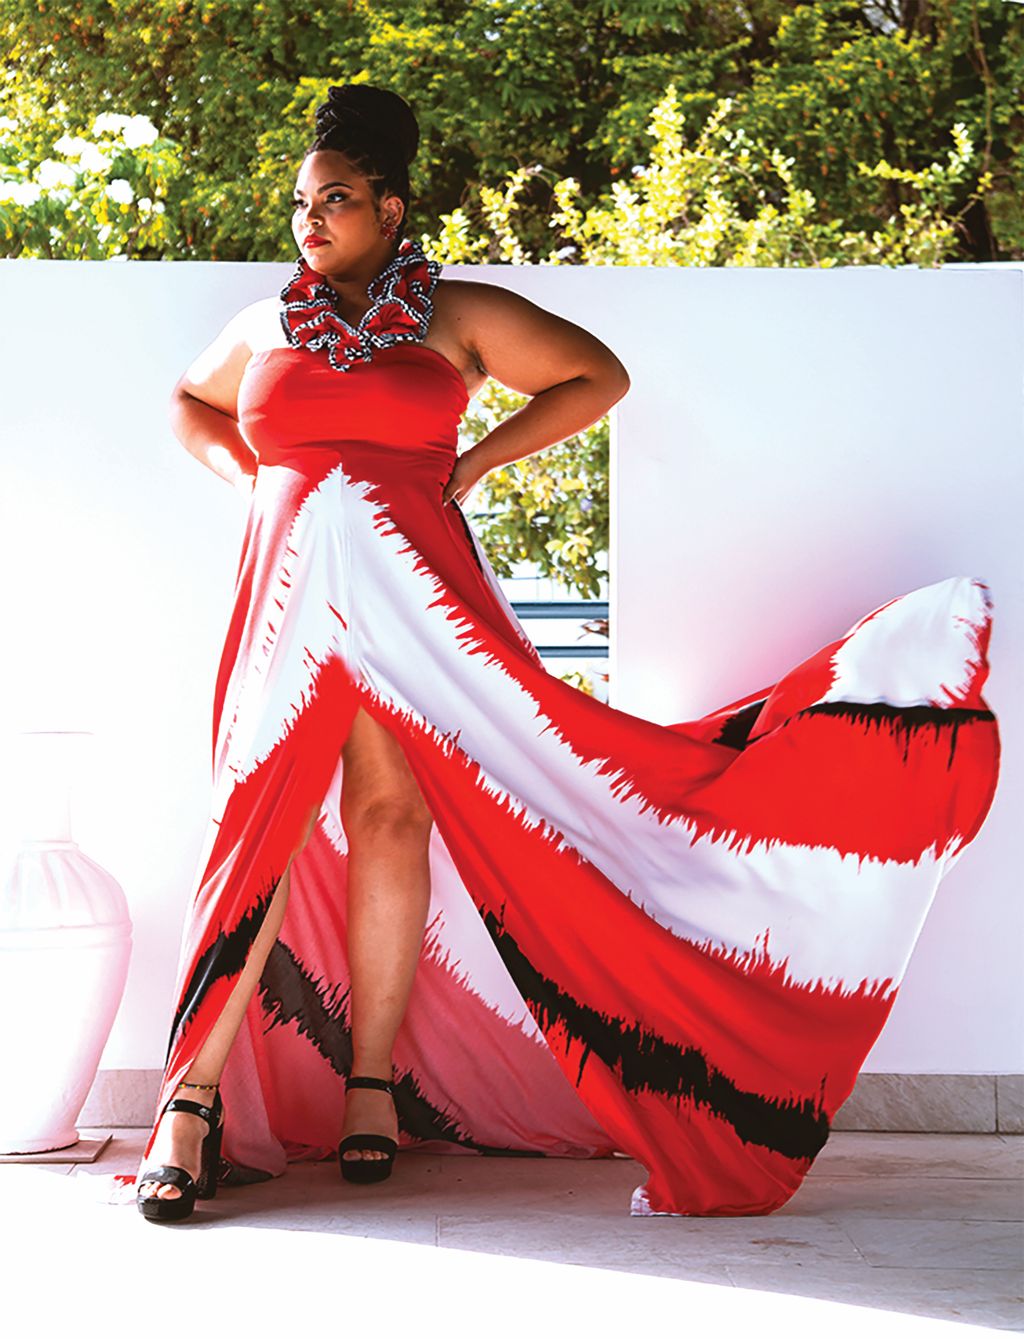 Fashion changes but Style endures - Trinidad Guardian